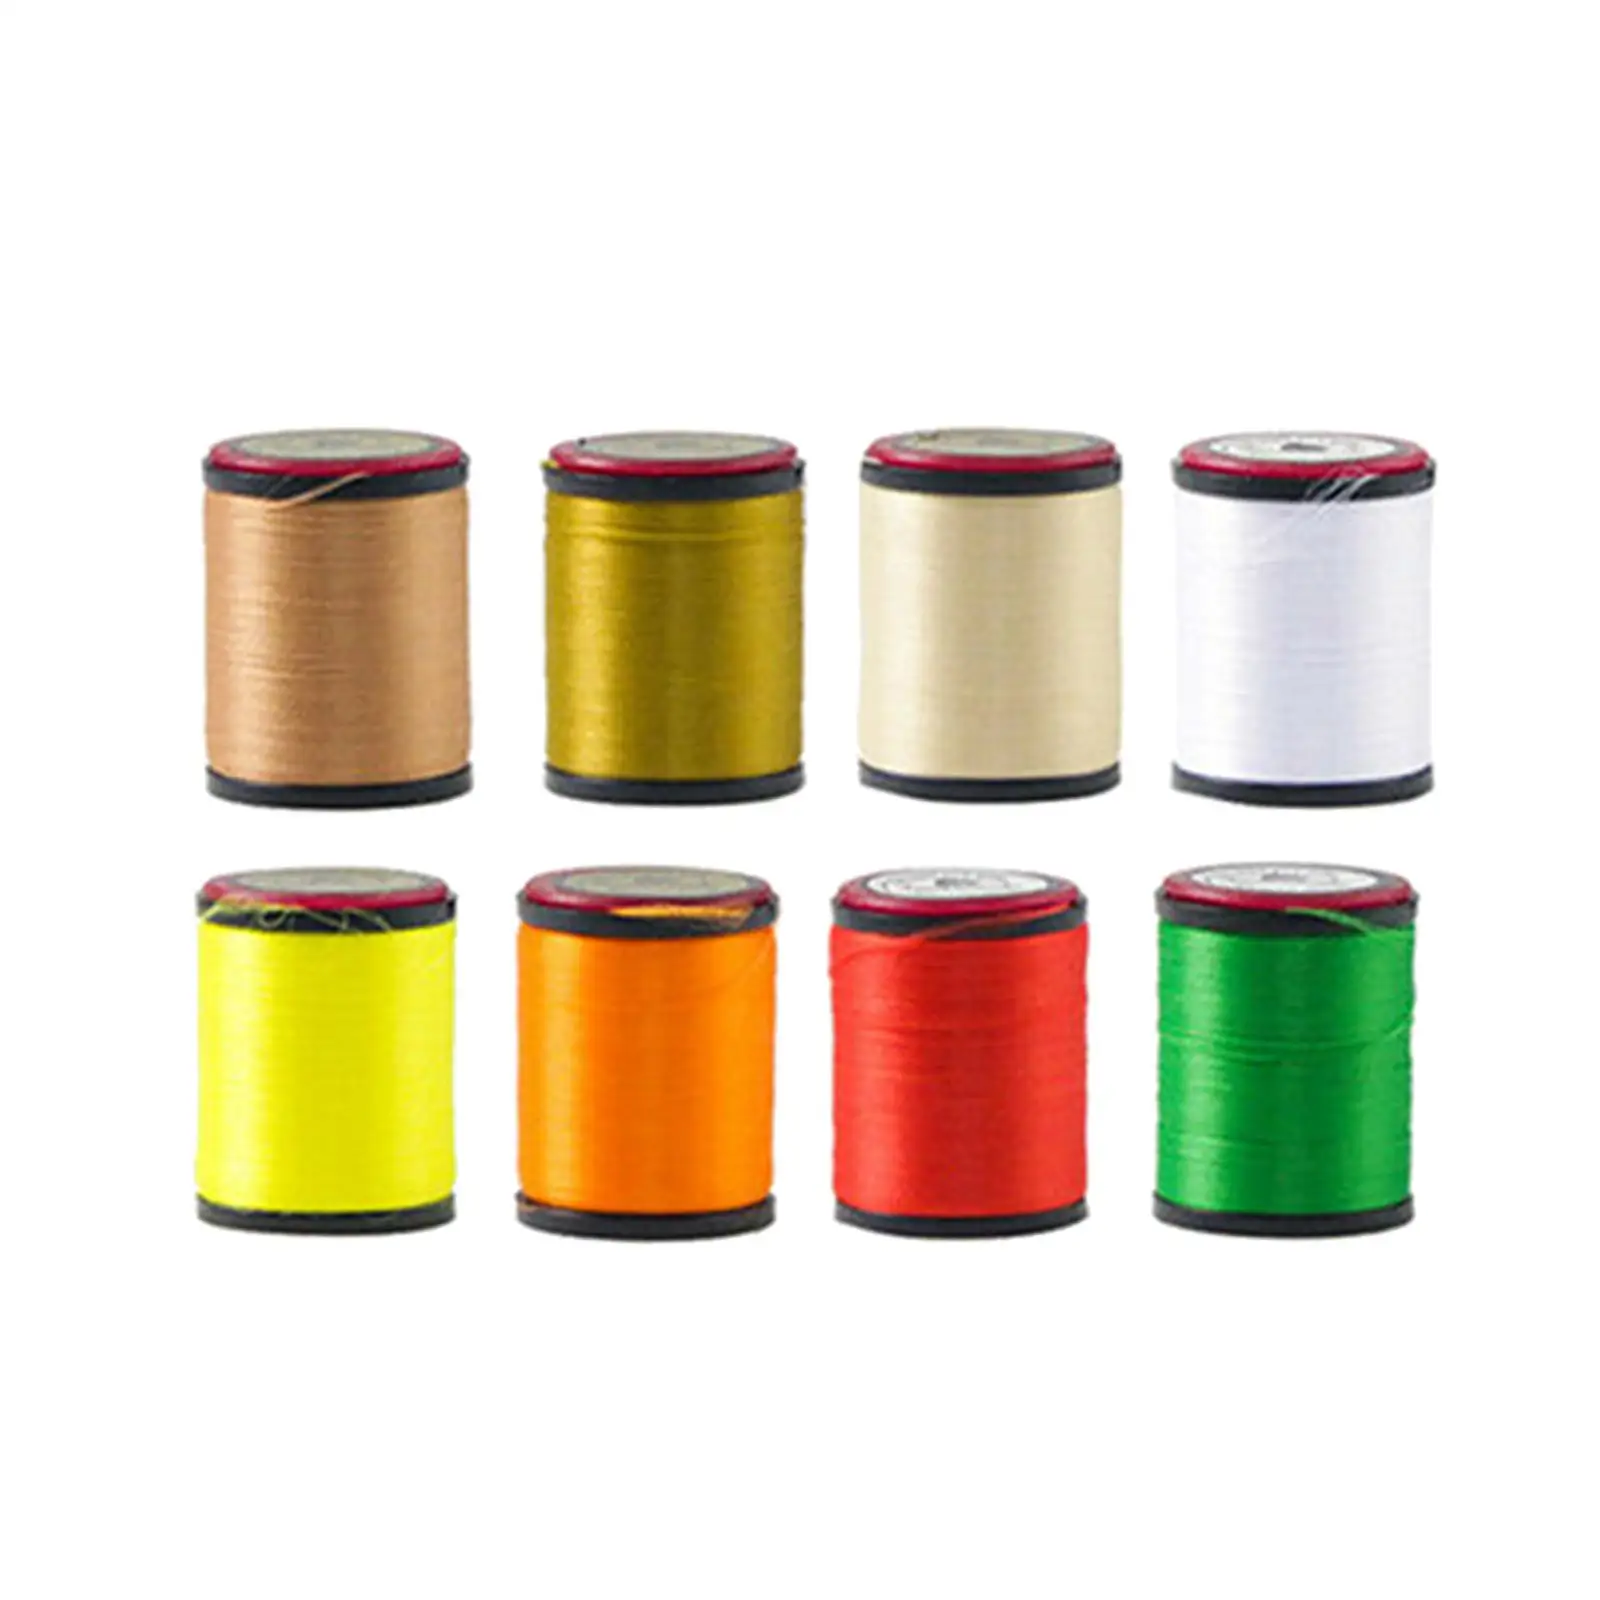  Fly Tying Kit, Fly Tying Materials 8 Color Fly Tying Thread Elastic Fly